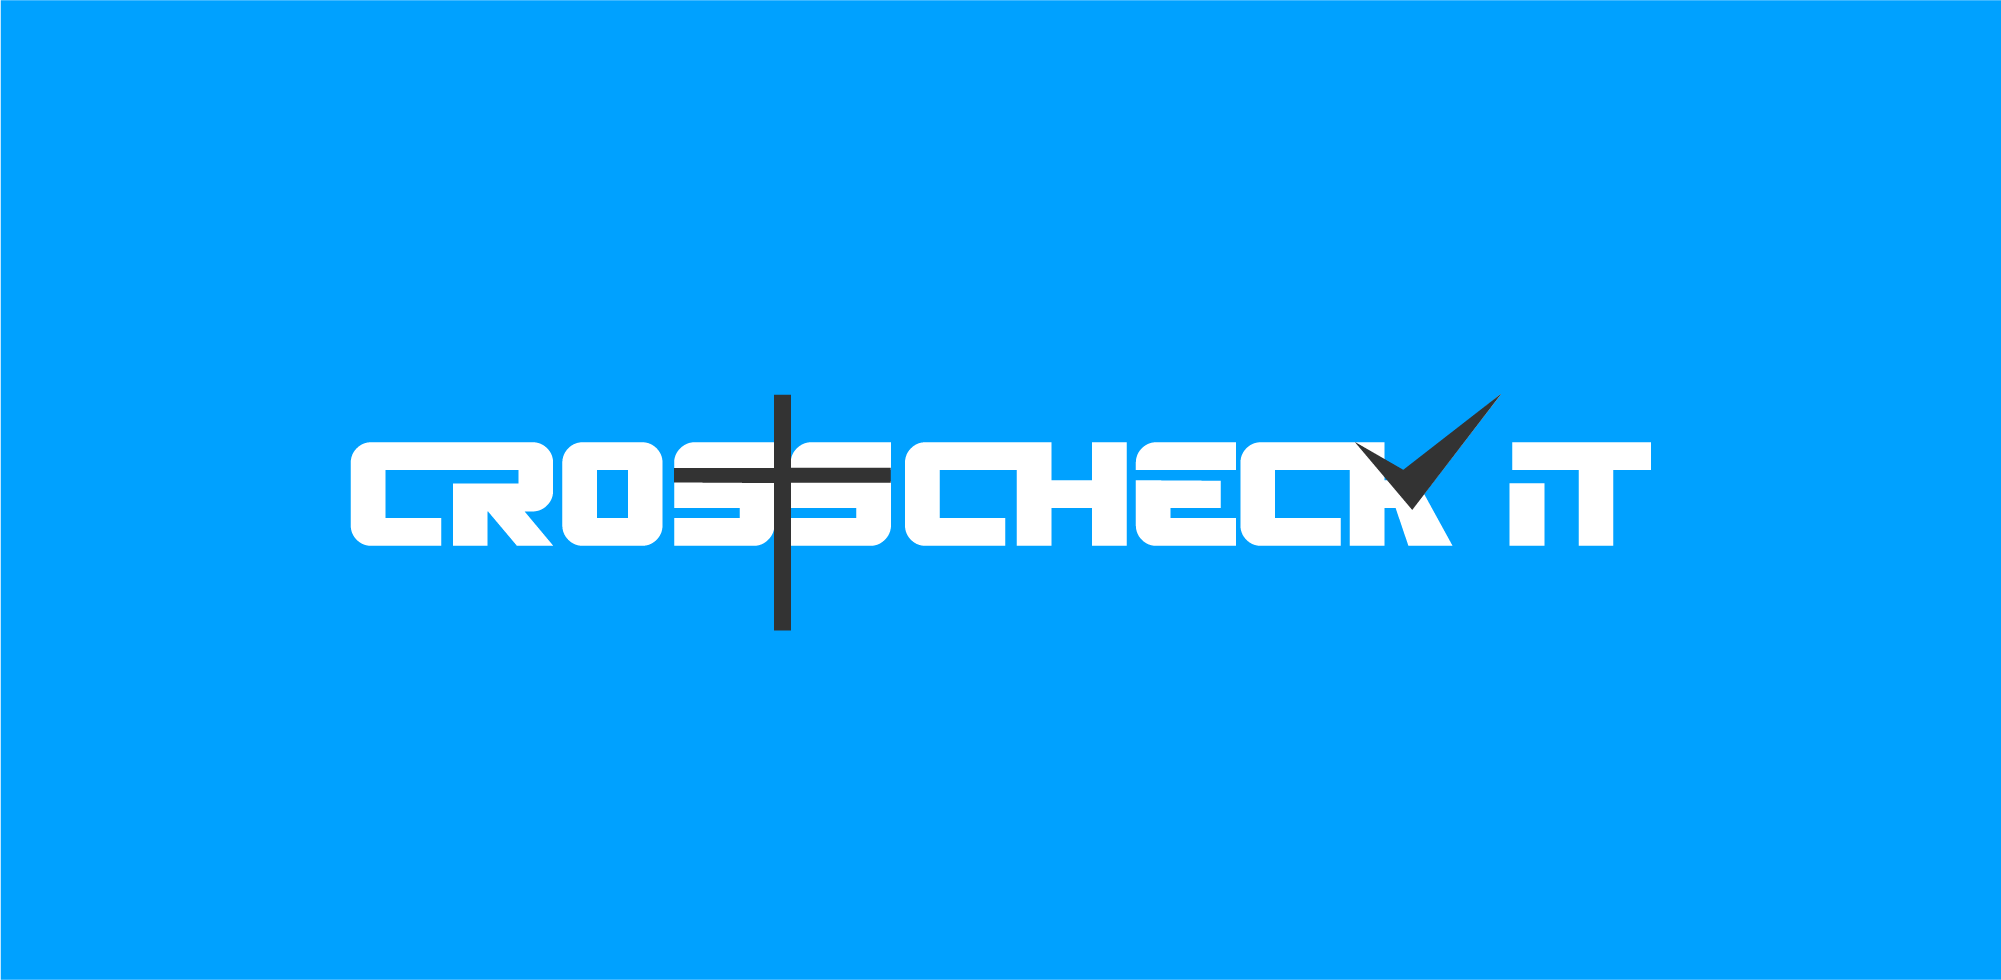 Let's Talk About Cross Checking 